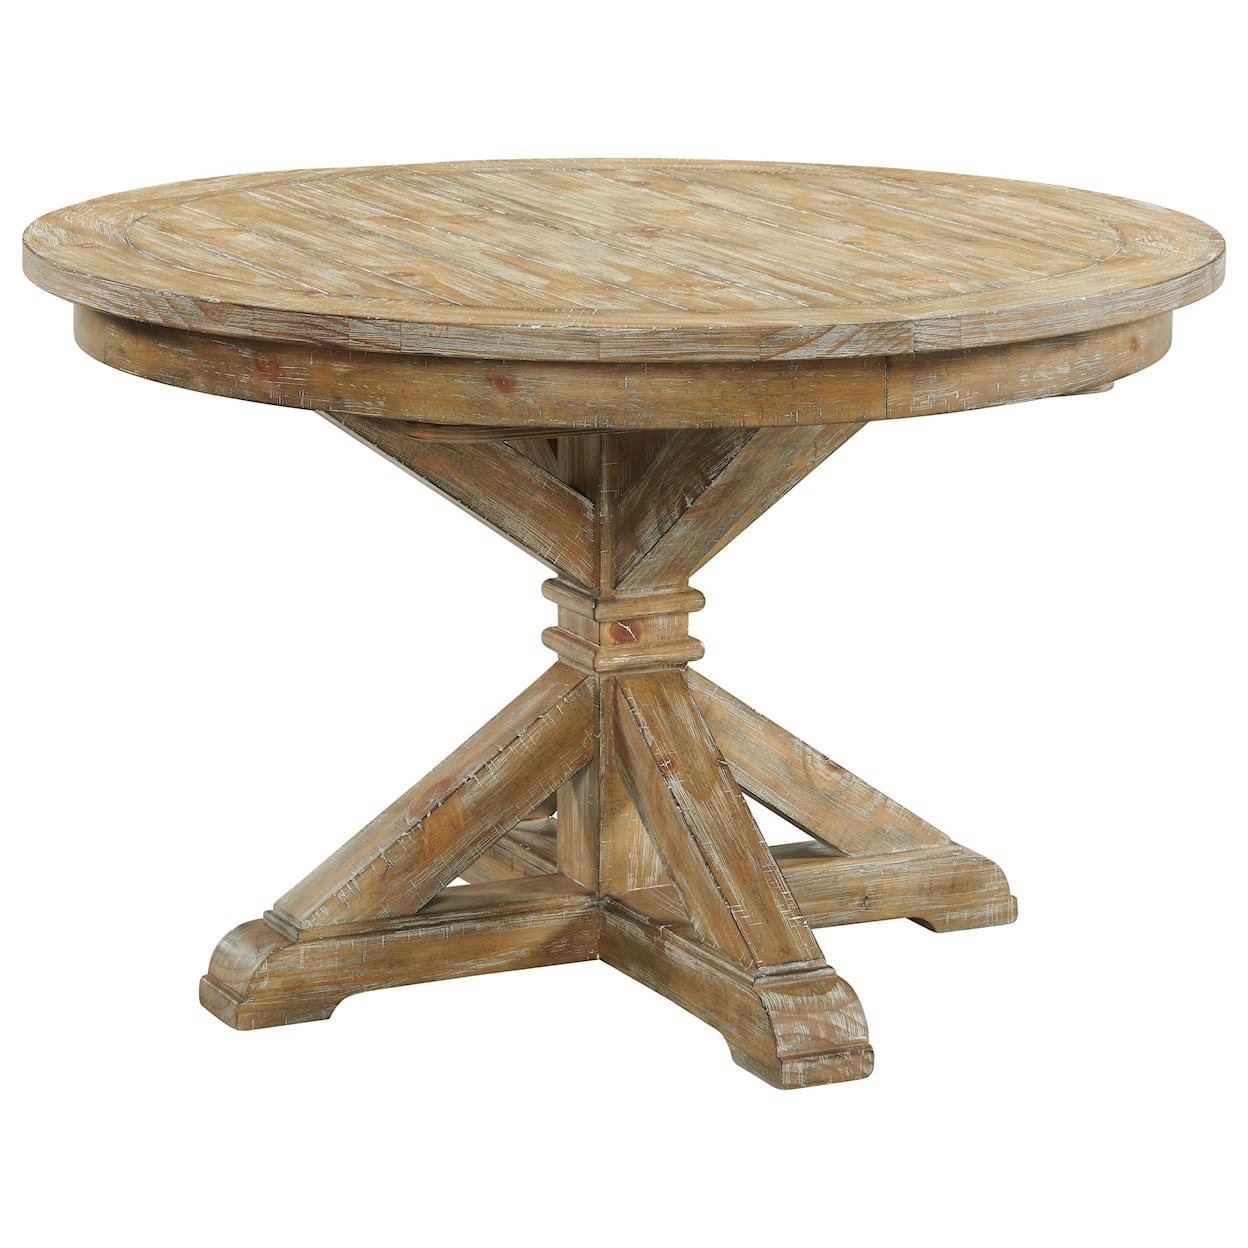 Riverside Furniture Sonora Round Dining Table